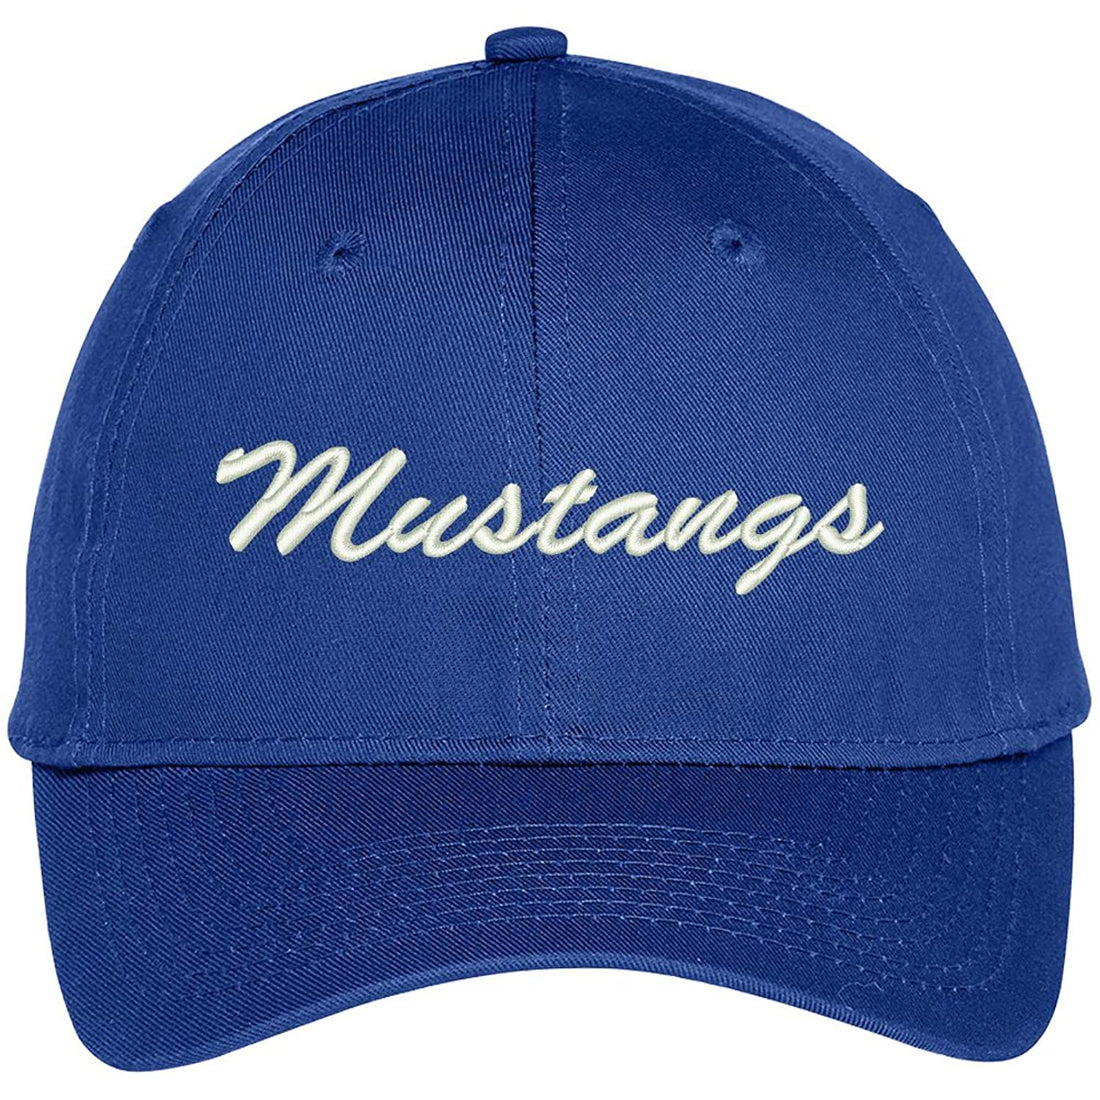 Trendy Apparel Shop Mustangs Embroidered Team Nickname Mascot Cap